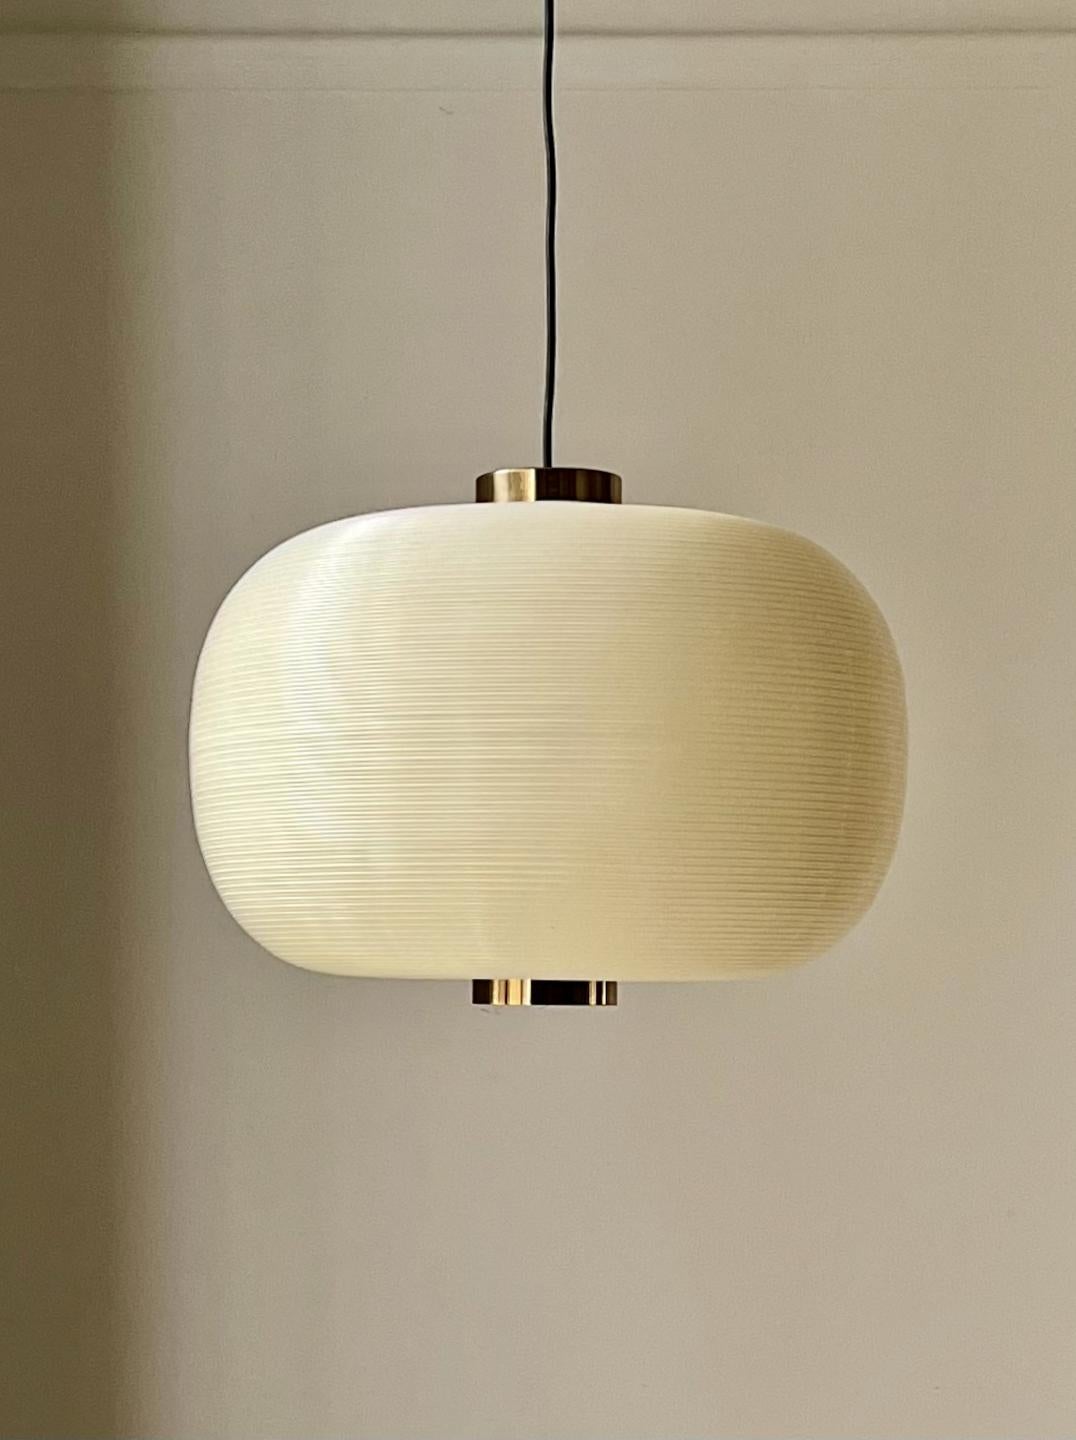 A pale cream pendant light of Rotaflex (spun cellulose acetate) with brass details, produced by Bergboms in Sweden. Design attributed to Sigvard Bernadotte.

The light is in good original condition with minor signs of wear in line with age and use,